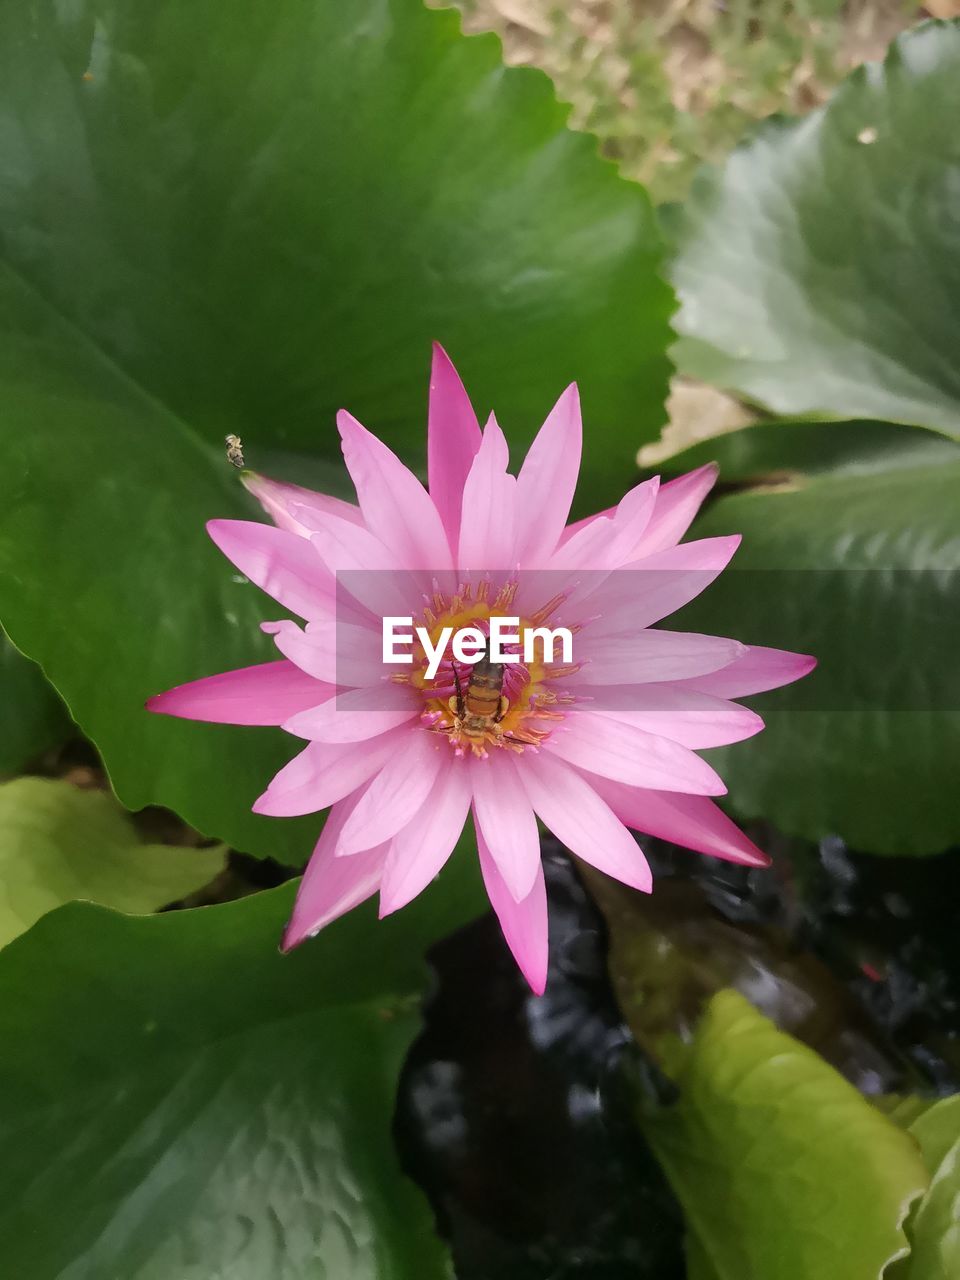 flower, flowering plant, plant, beauty in nature, freshness, leaf, water lily, plant part, petal, pink, flower head, water, nature, lake, inflorescence, aquatic plant, close-up, fragility, lotus water lily, macro photography, growth, no people, green, pollen, lily, floating, outdoors, floating on water, blossom, environment, springtime, botany, day, animal themes, animal